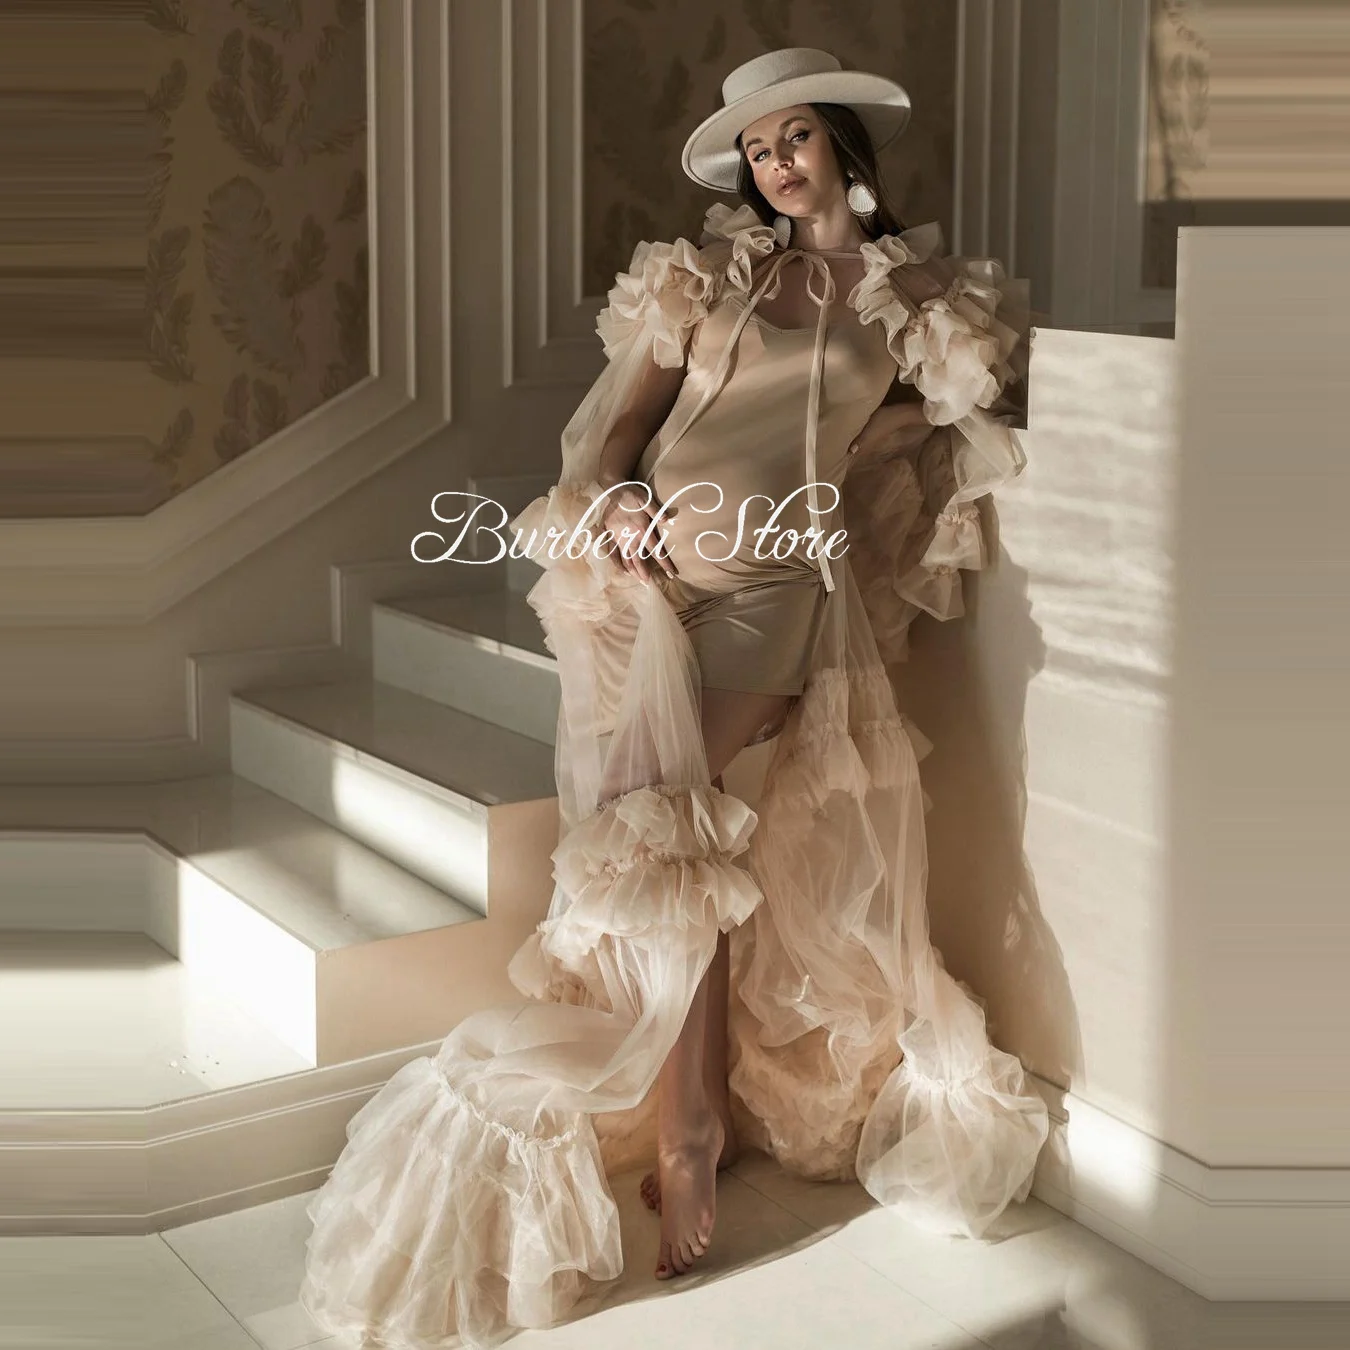 Two Pieces Tulle Maternity Women Dress With Bodysuit To Photo-shoot New Fashion Ruffles Pregnancy Dresses Mesh Jacket See Thru